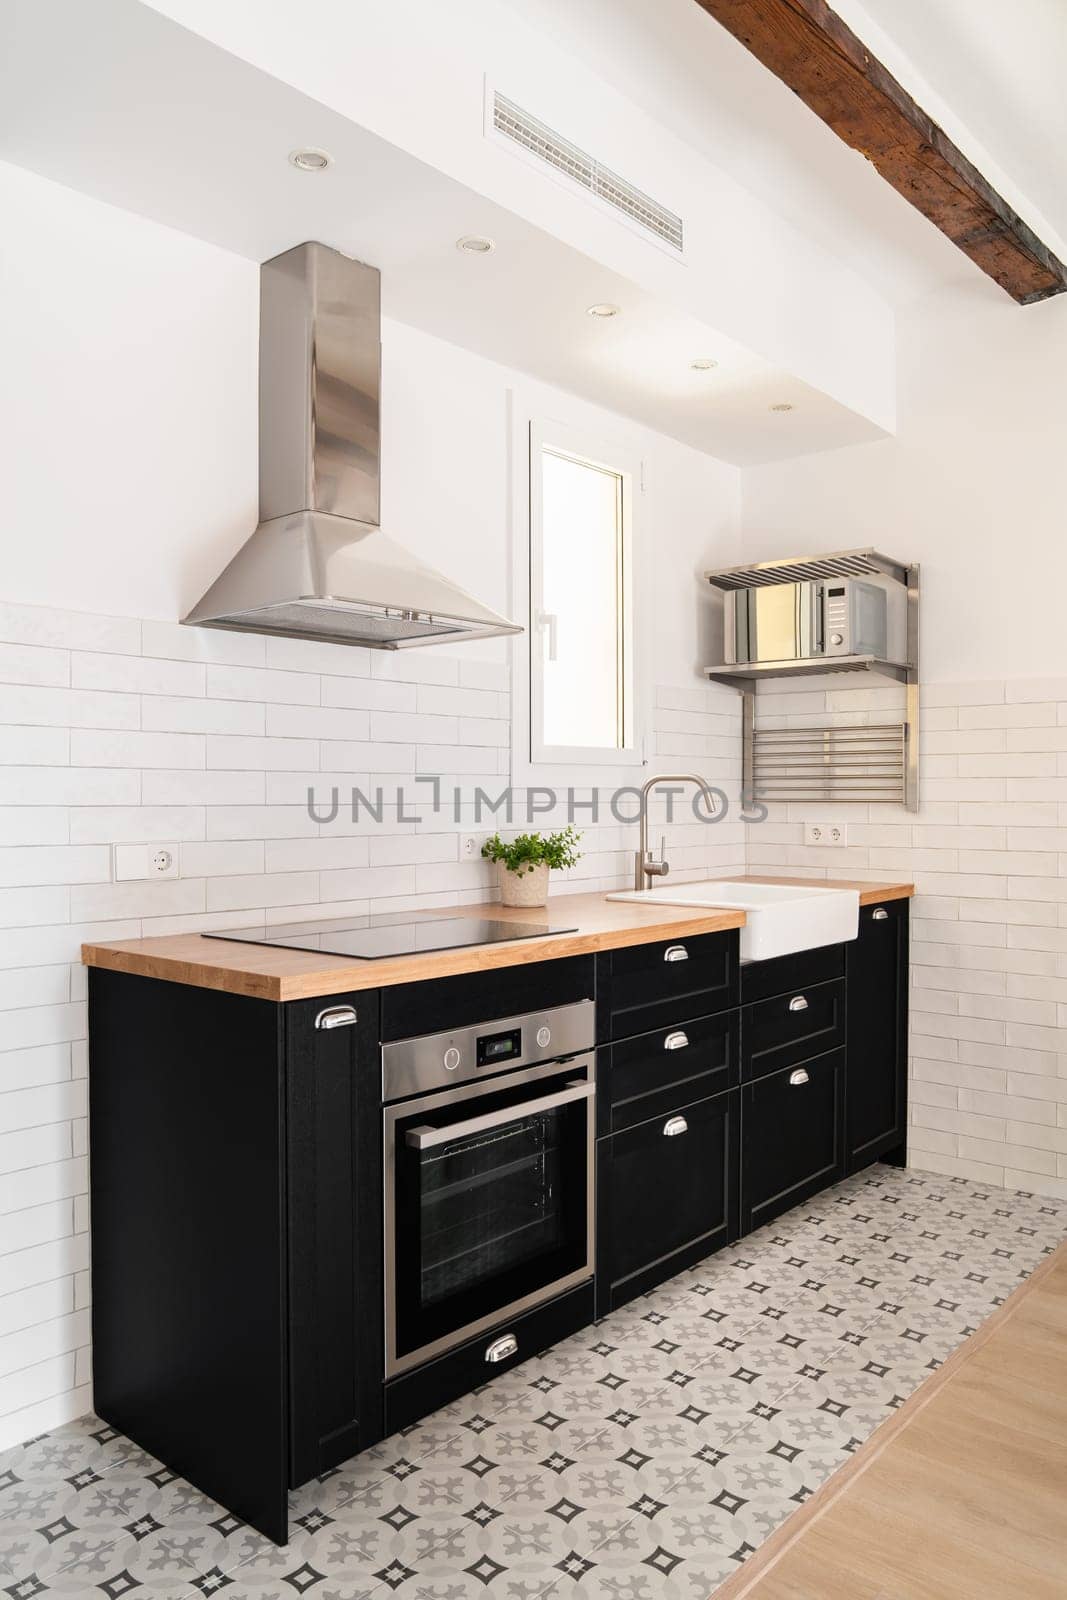 Vertical shot black kitchen island with drawers stove and convection cooker and modern appliances in scandinavian style apartment in new building. Copyspace.